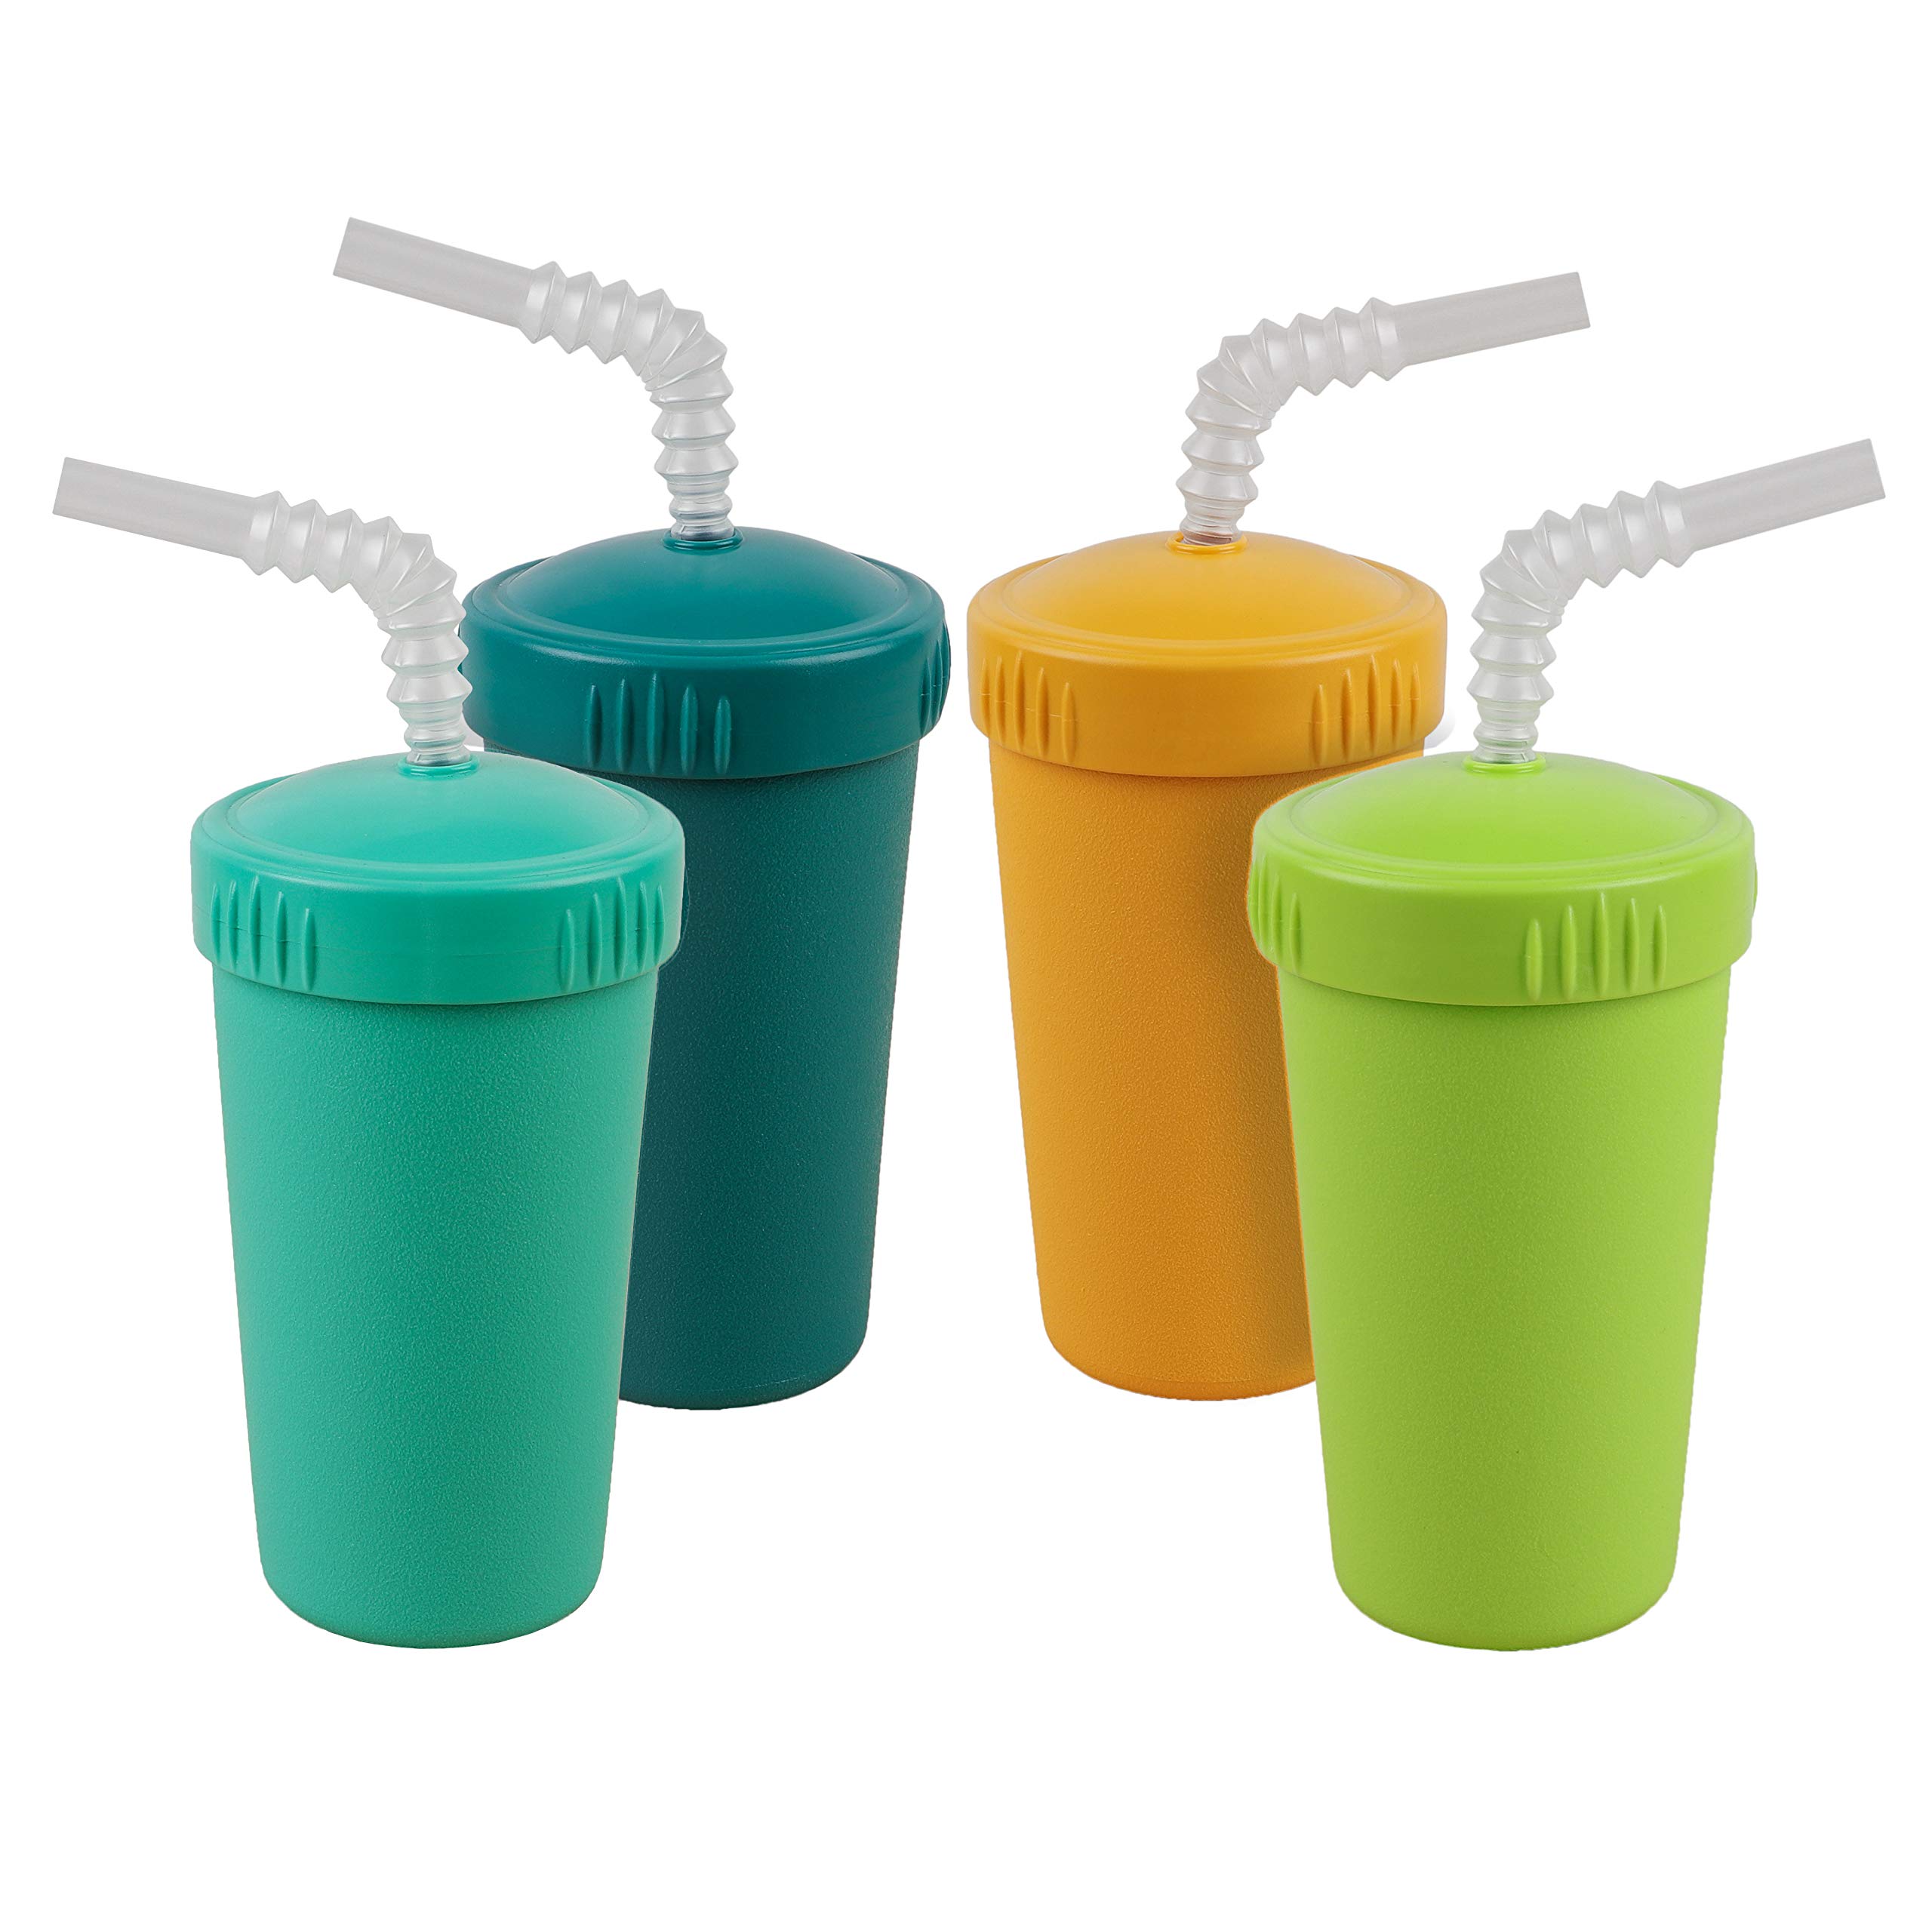 Re Play Made in USA 4 Pack Reusable Toddler Cups With Straws - Dishwasher  Safe Kids Straw Cups Made from Recycled Milk Jugs with Reversible Straws -  Aqua Asst Aqua Asst Plastic